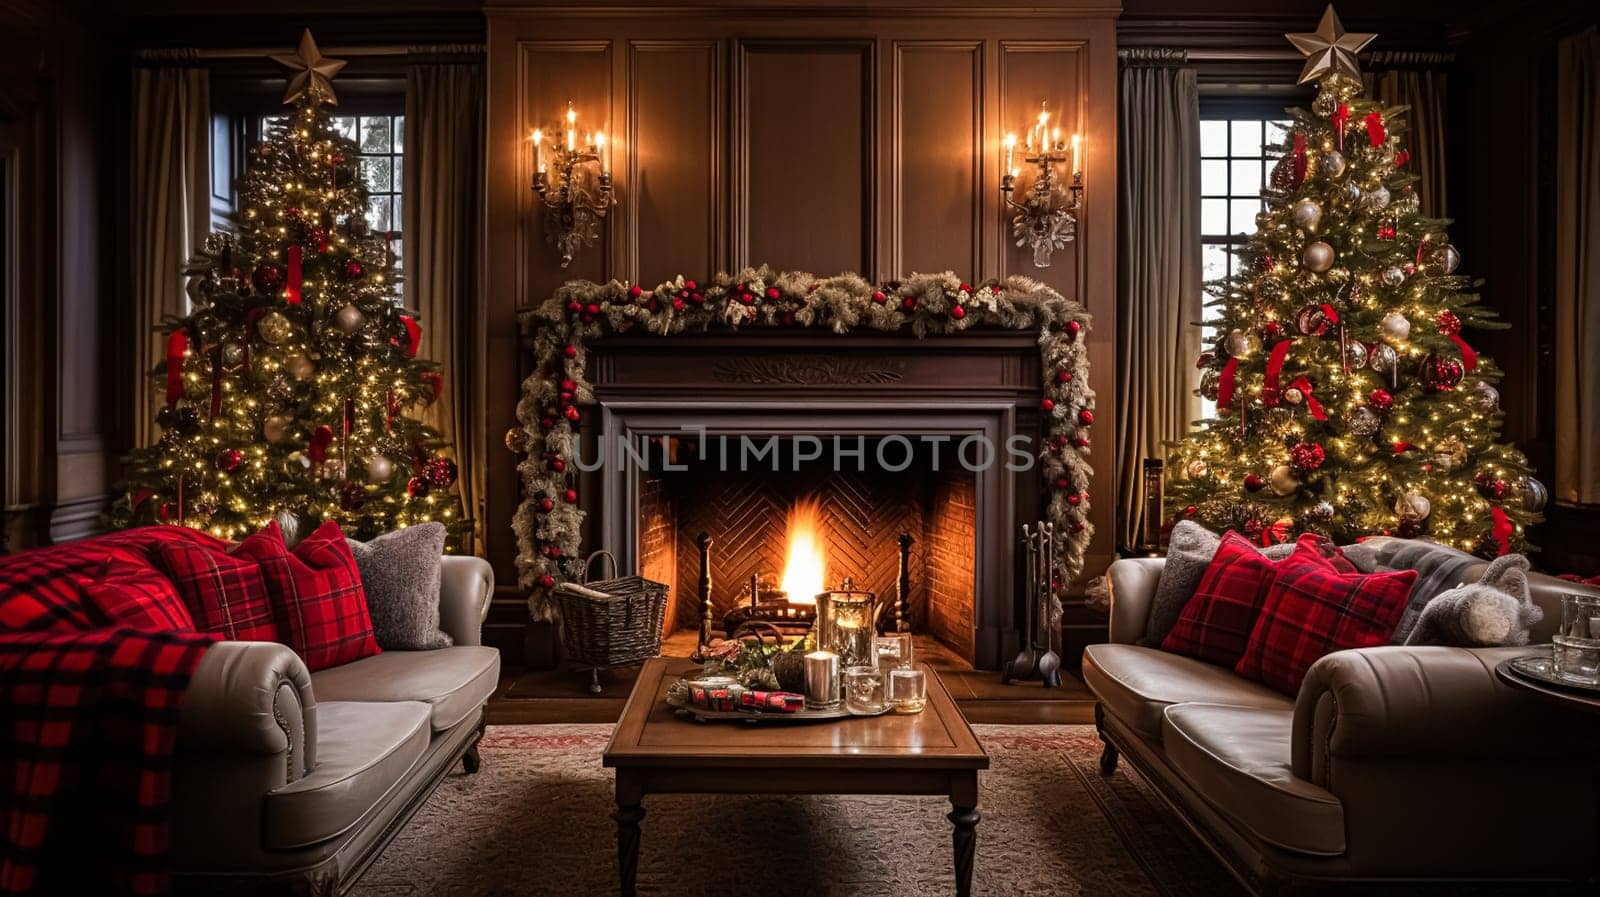 Christmas at the manor, English countryside decoration and interior decor by Anneleven